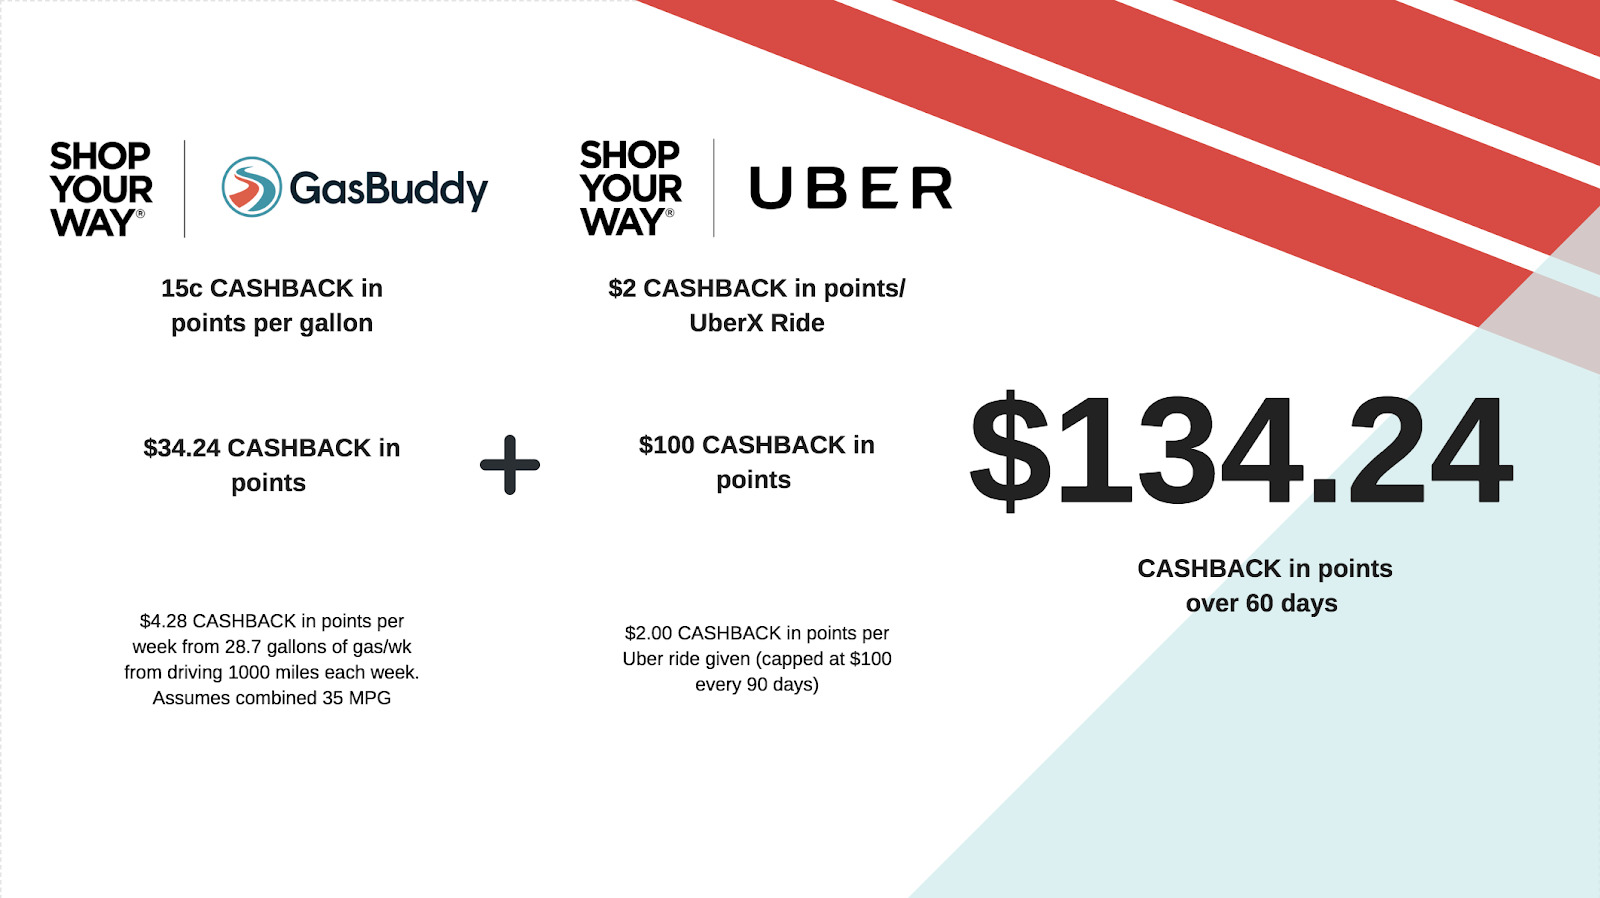 image of The Shop Your Way + GasBuddy and Uber partnerships logos